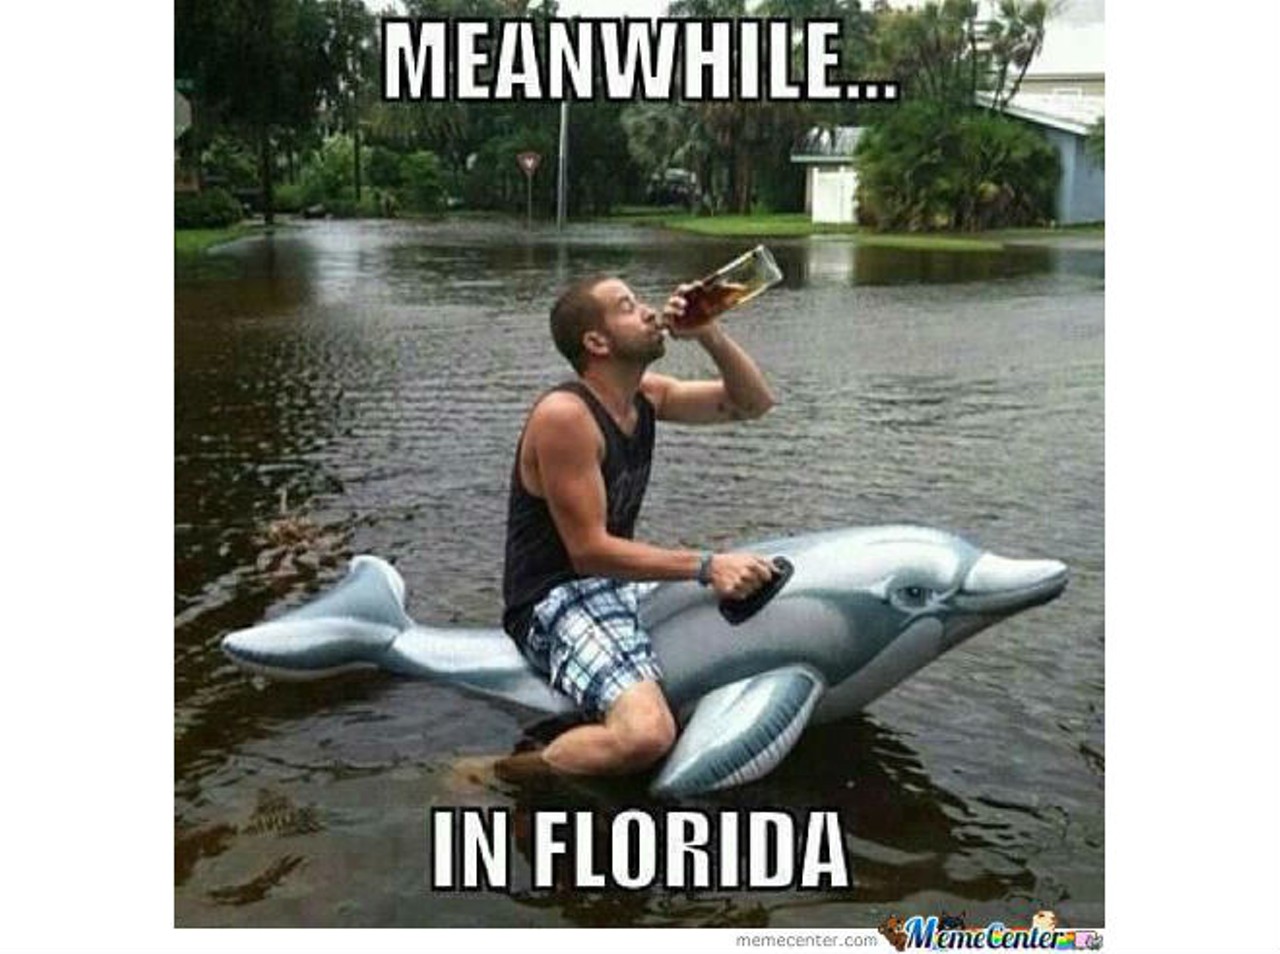 But that doesn't make these "Meanwhile in Florida" memes are any good. They're terrible.